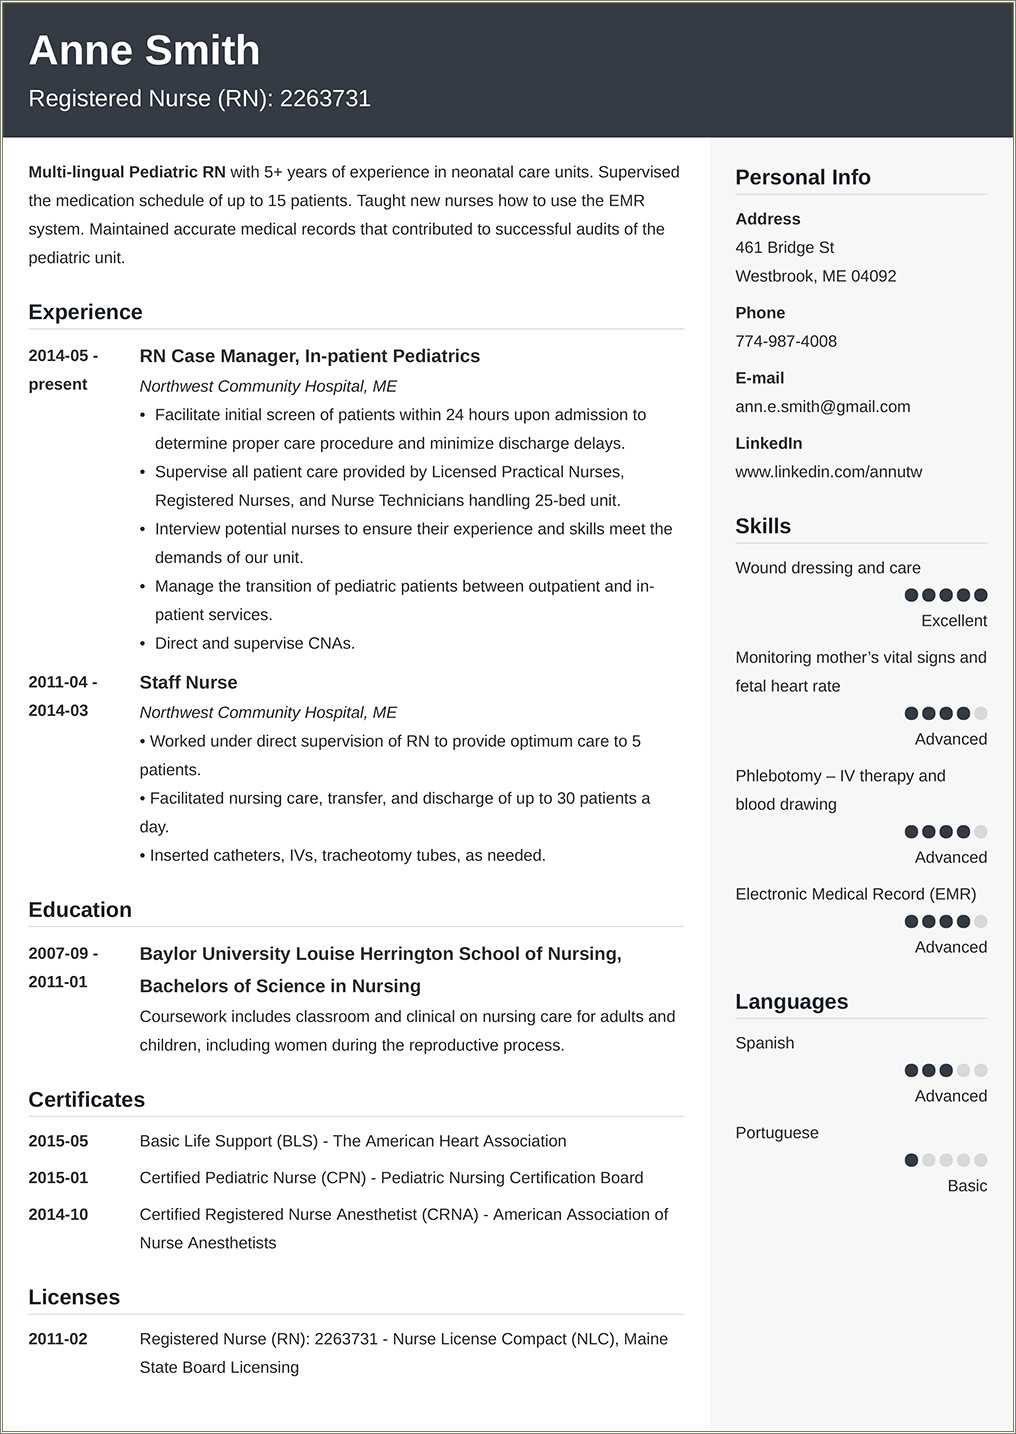 about me section on resume examples